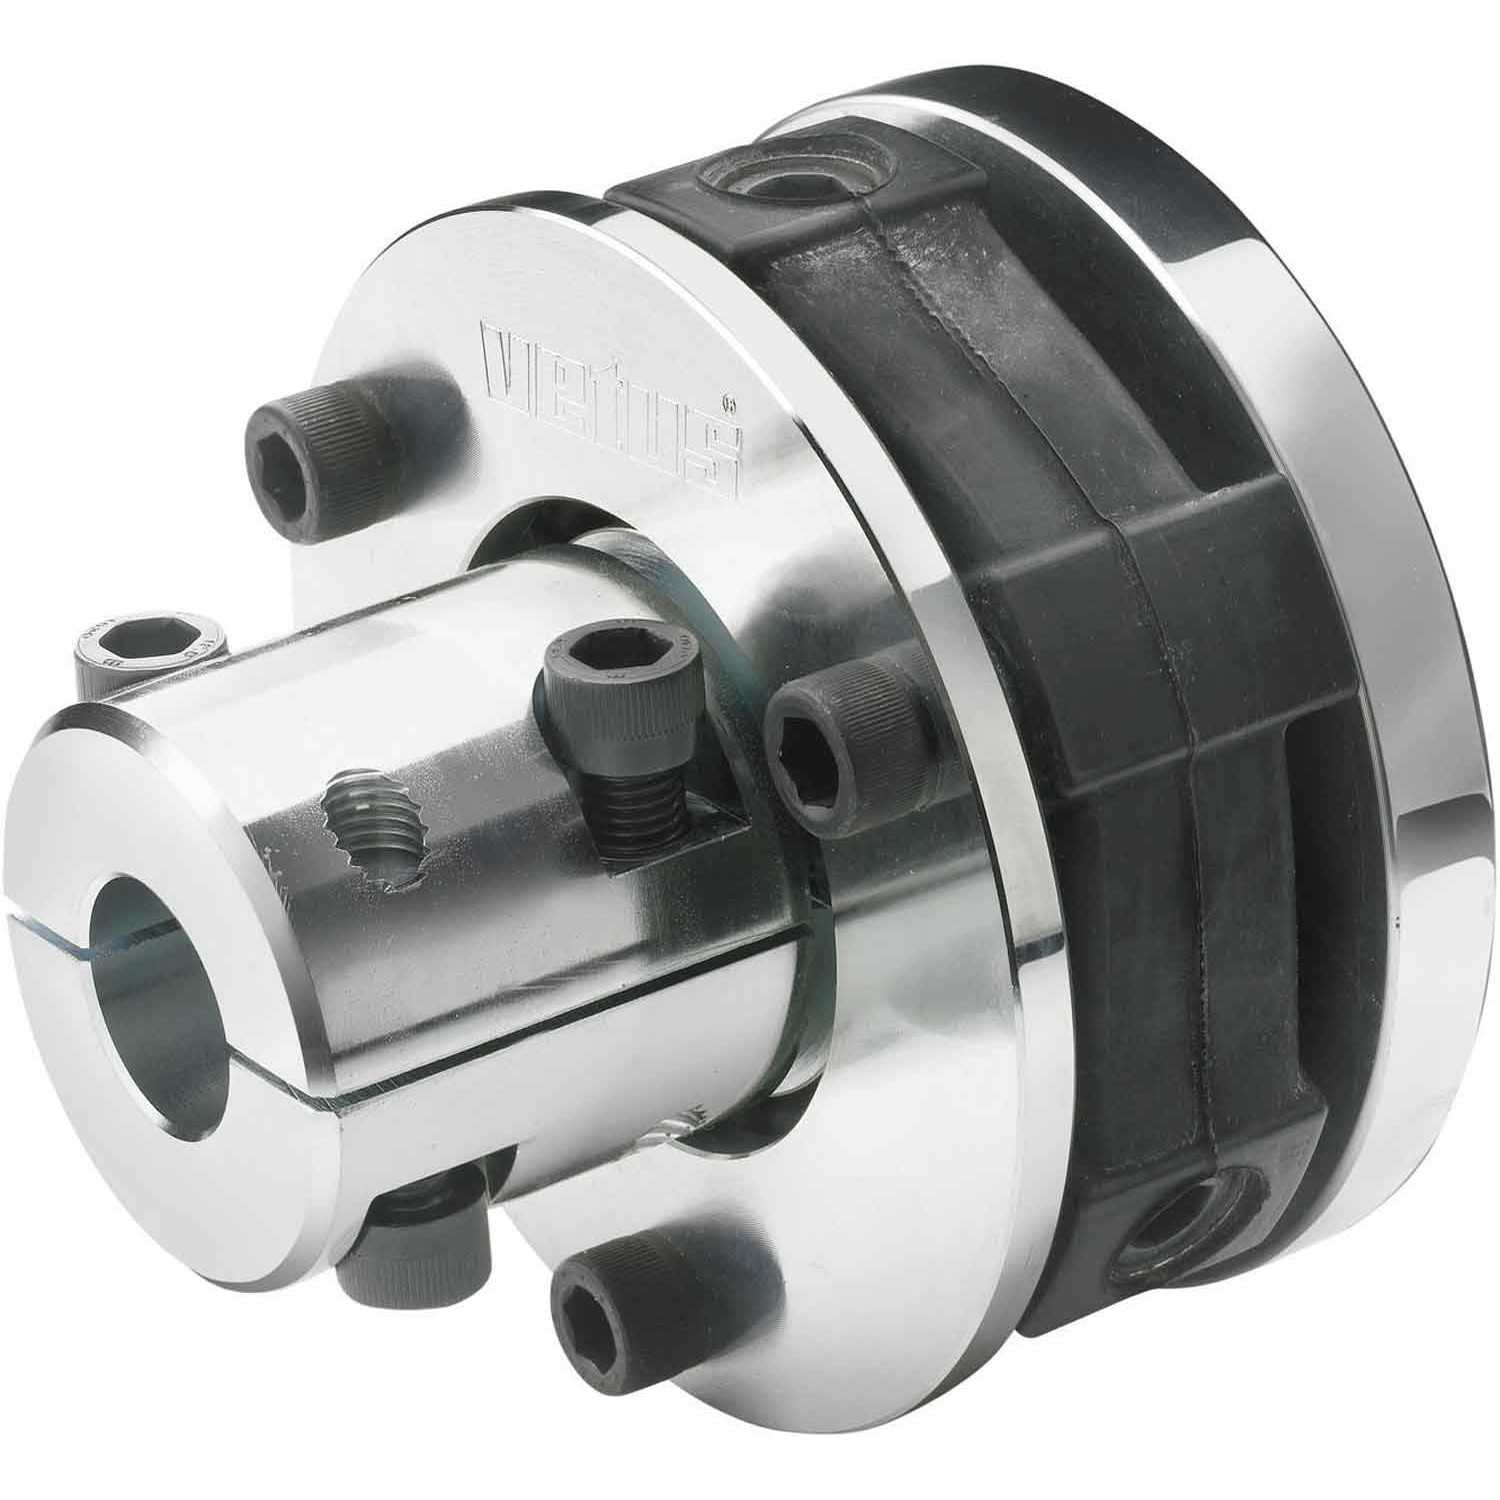 Details about   1/2" ACE Low Speed Shaft Pivoting Gearbox Flexible Universal Coupling MARINE 